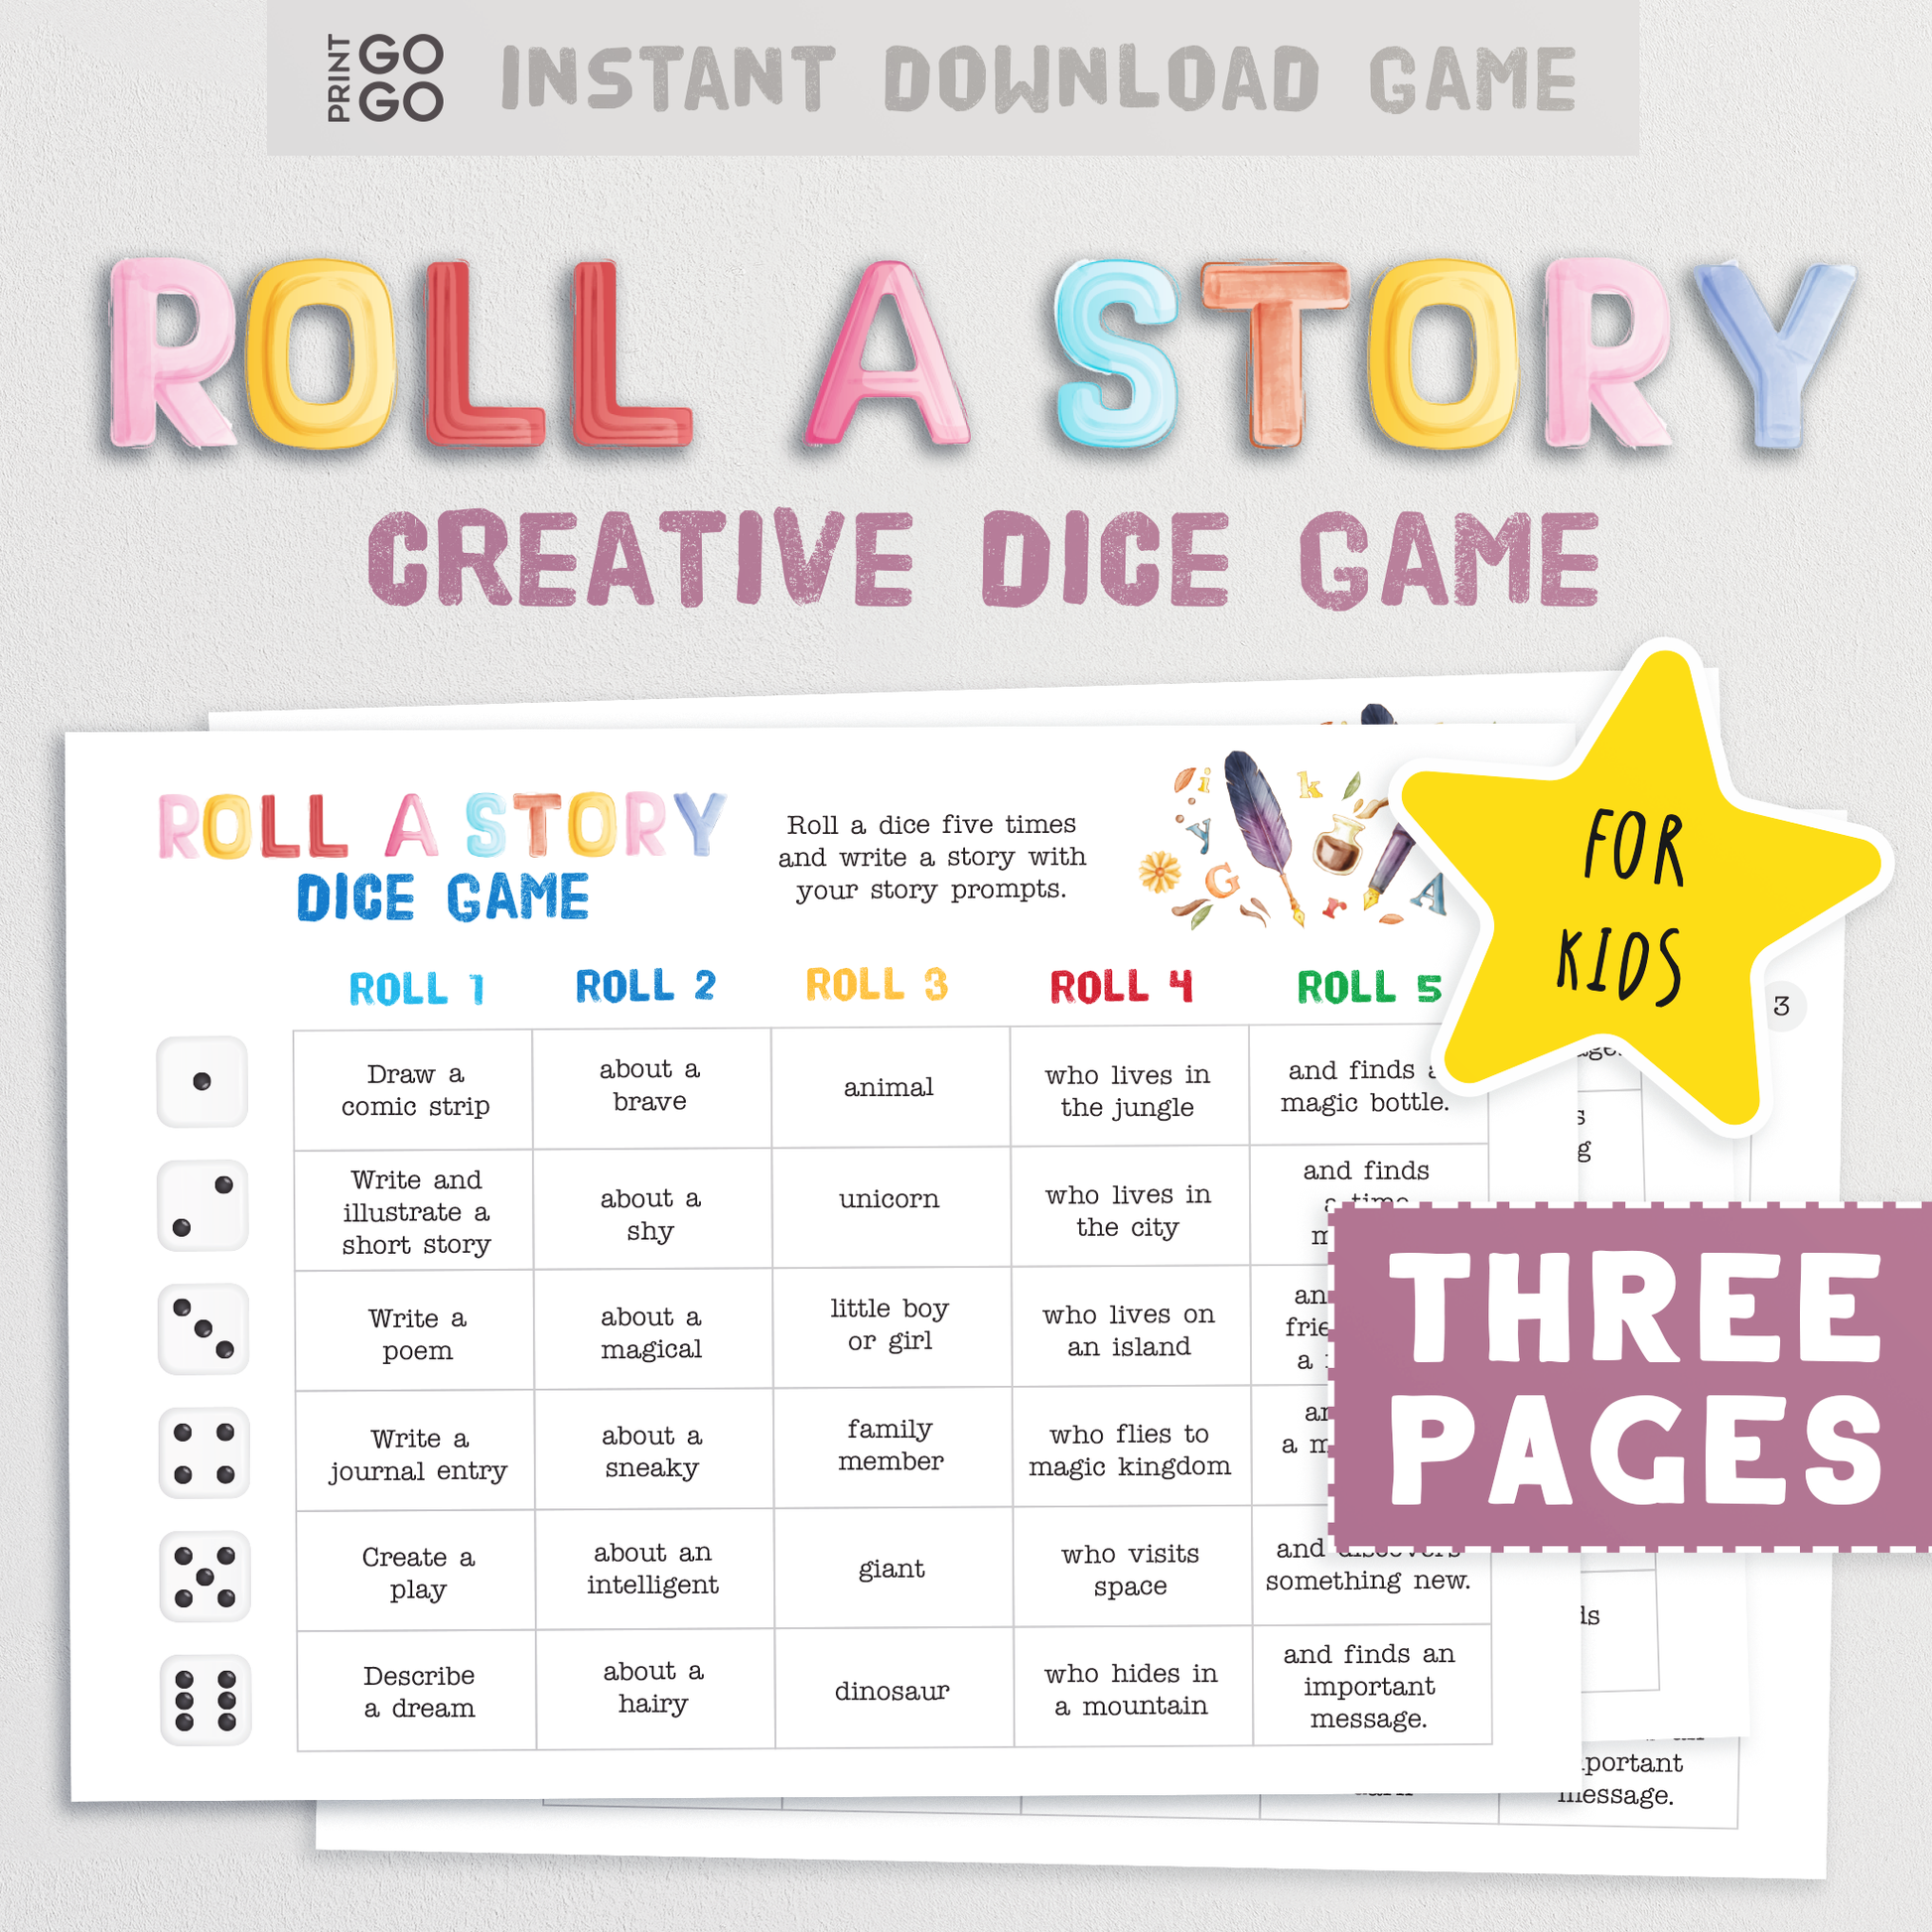 Roll A Story Dice Game for Kids